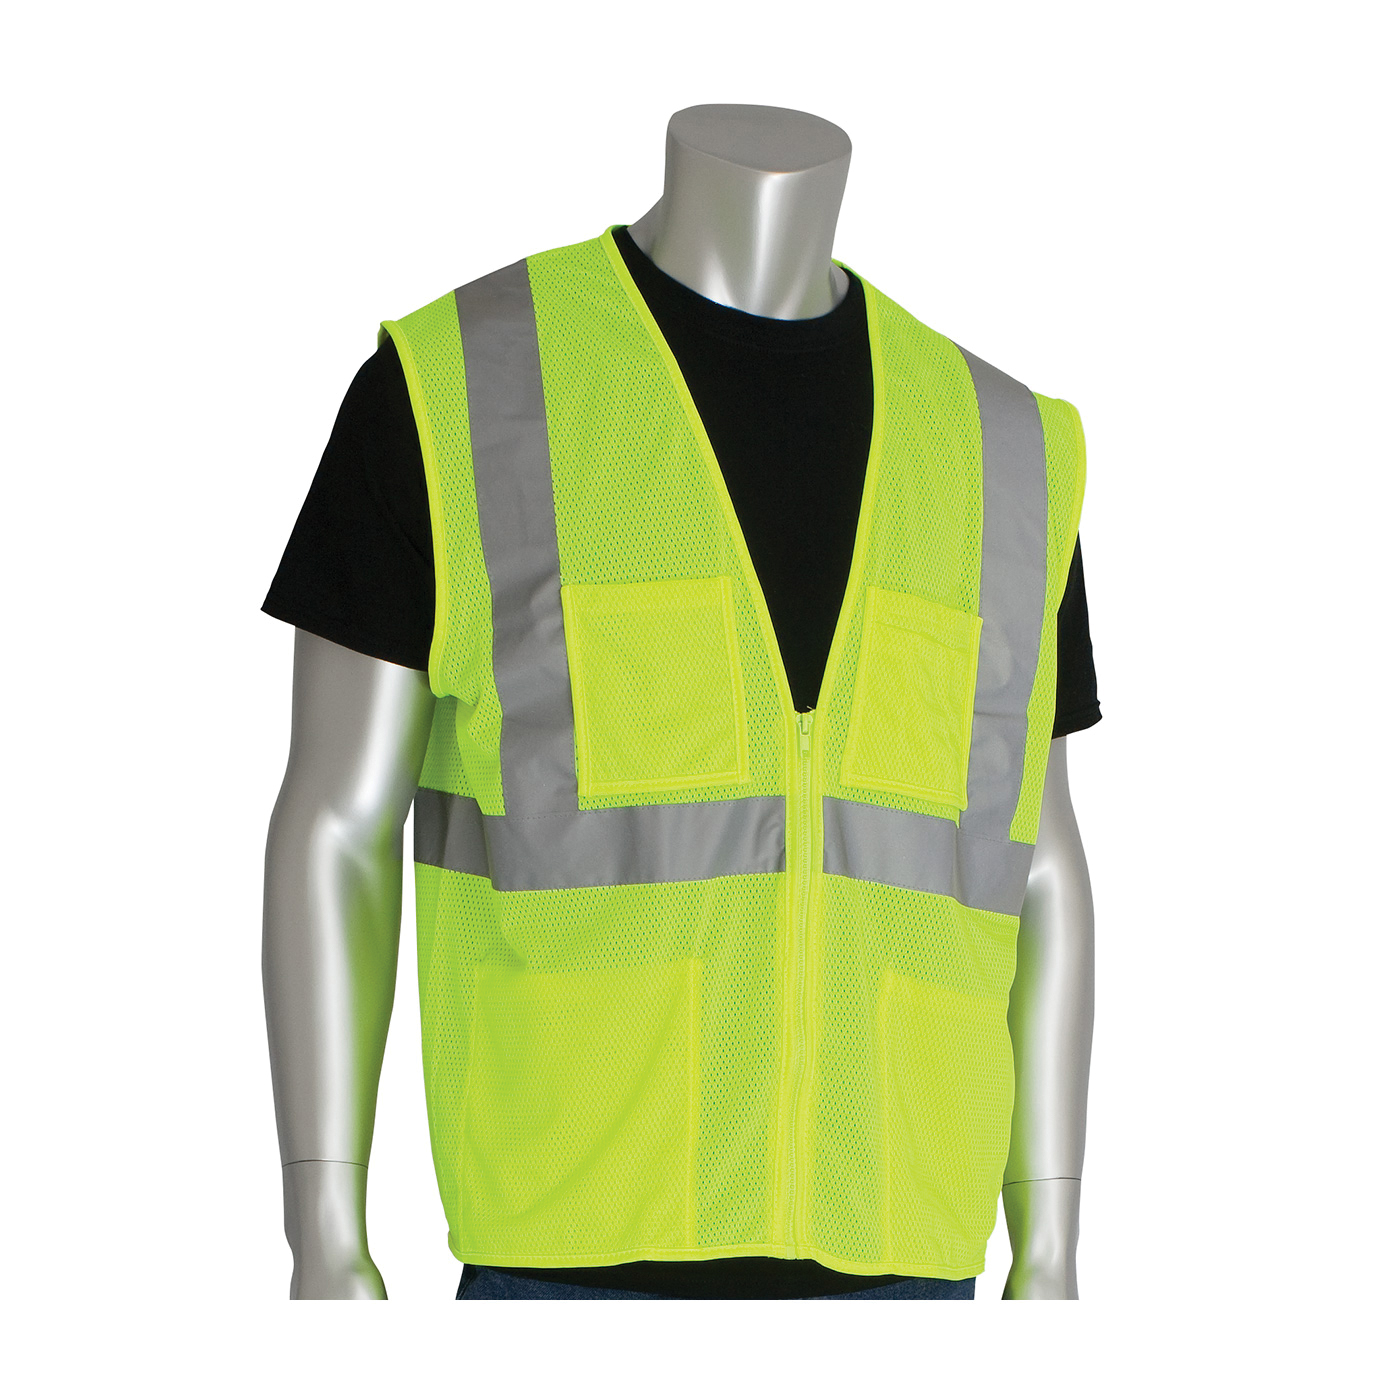 PIP® 302-MVGZ4PLY-L Safety Vest, L, Hi-Viz Lime Yellow, Polyester Mesh, Zipper Closure, 4 Pockets, ANSI Class: Class 2, Specifications Met: ANSI 107 Type R